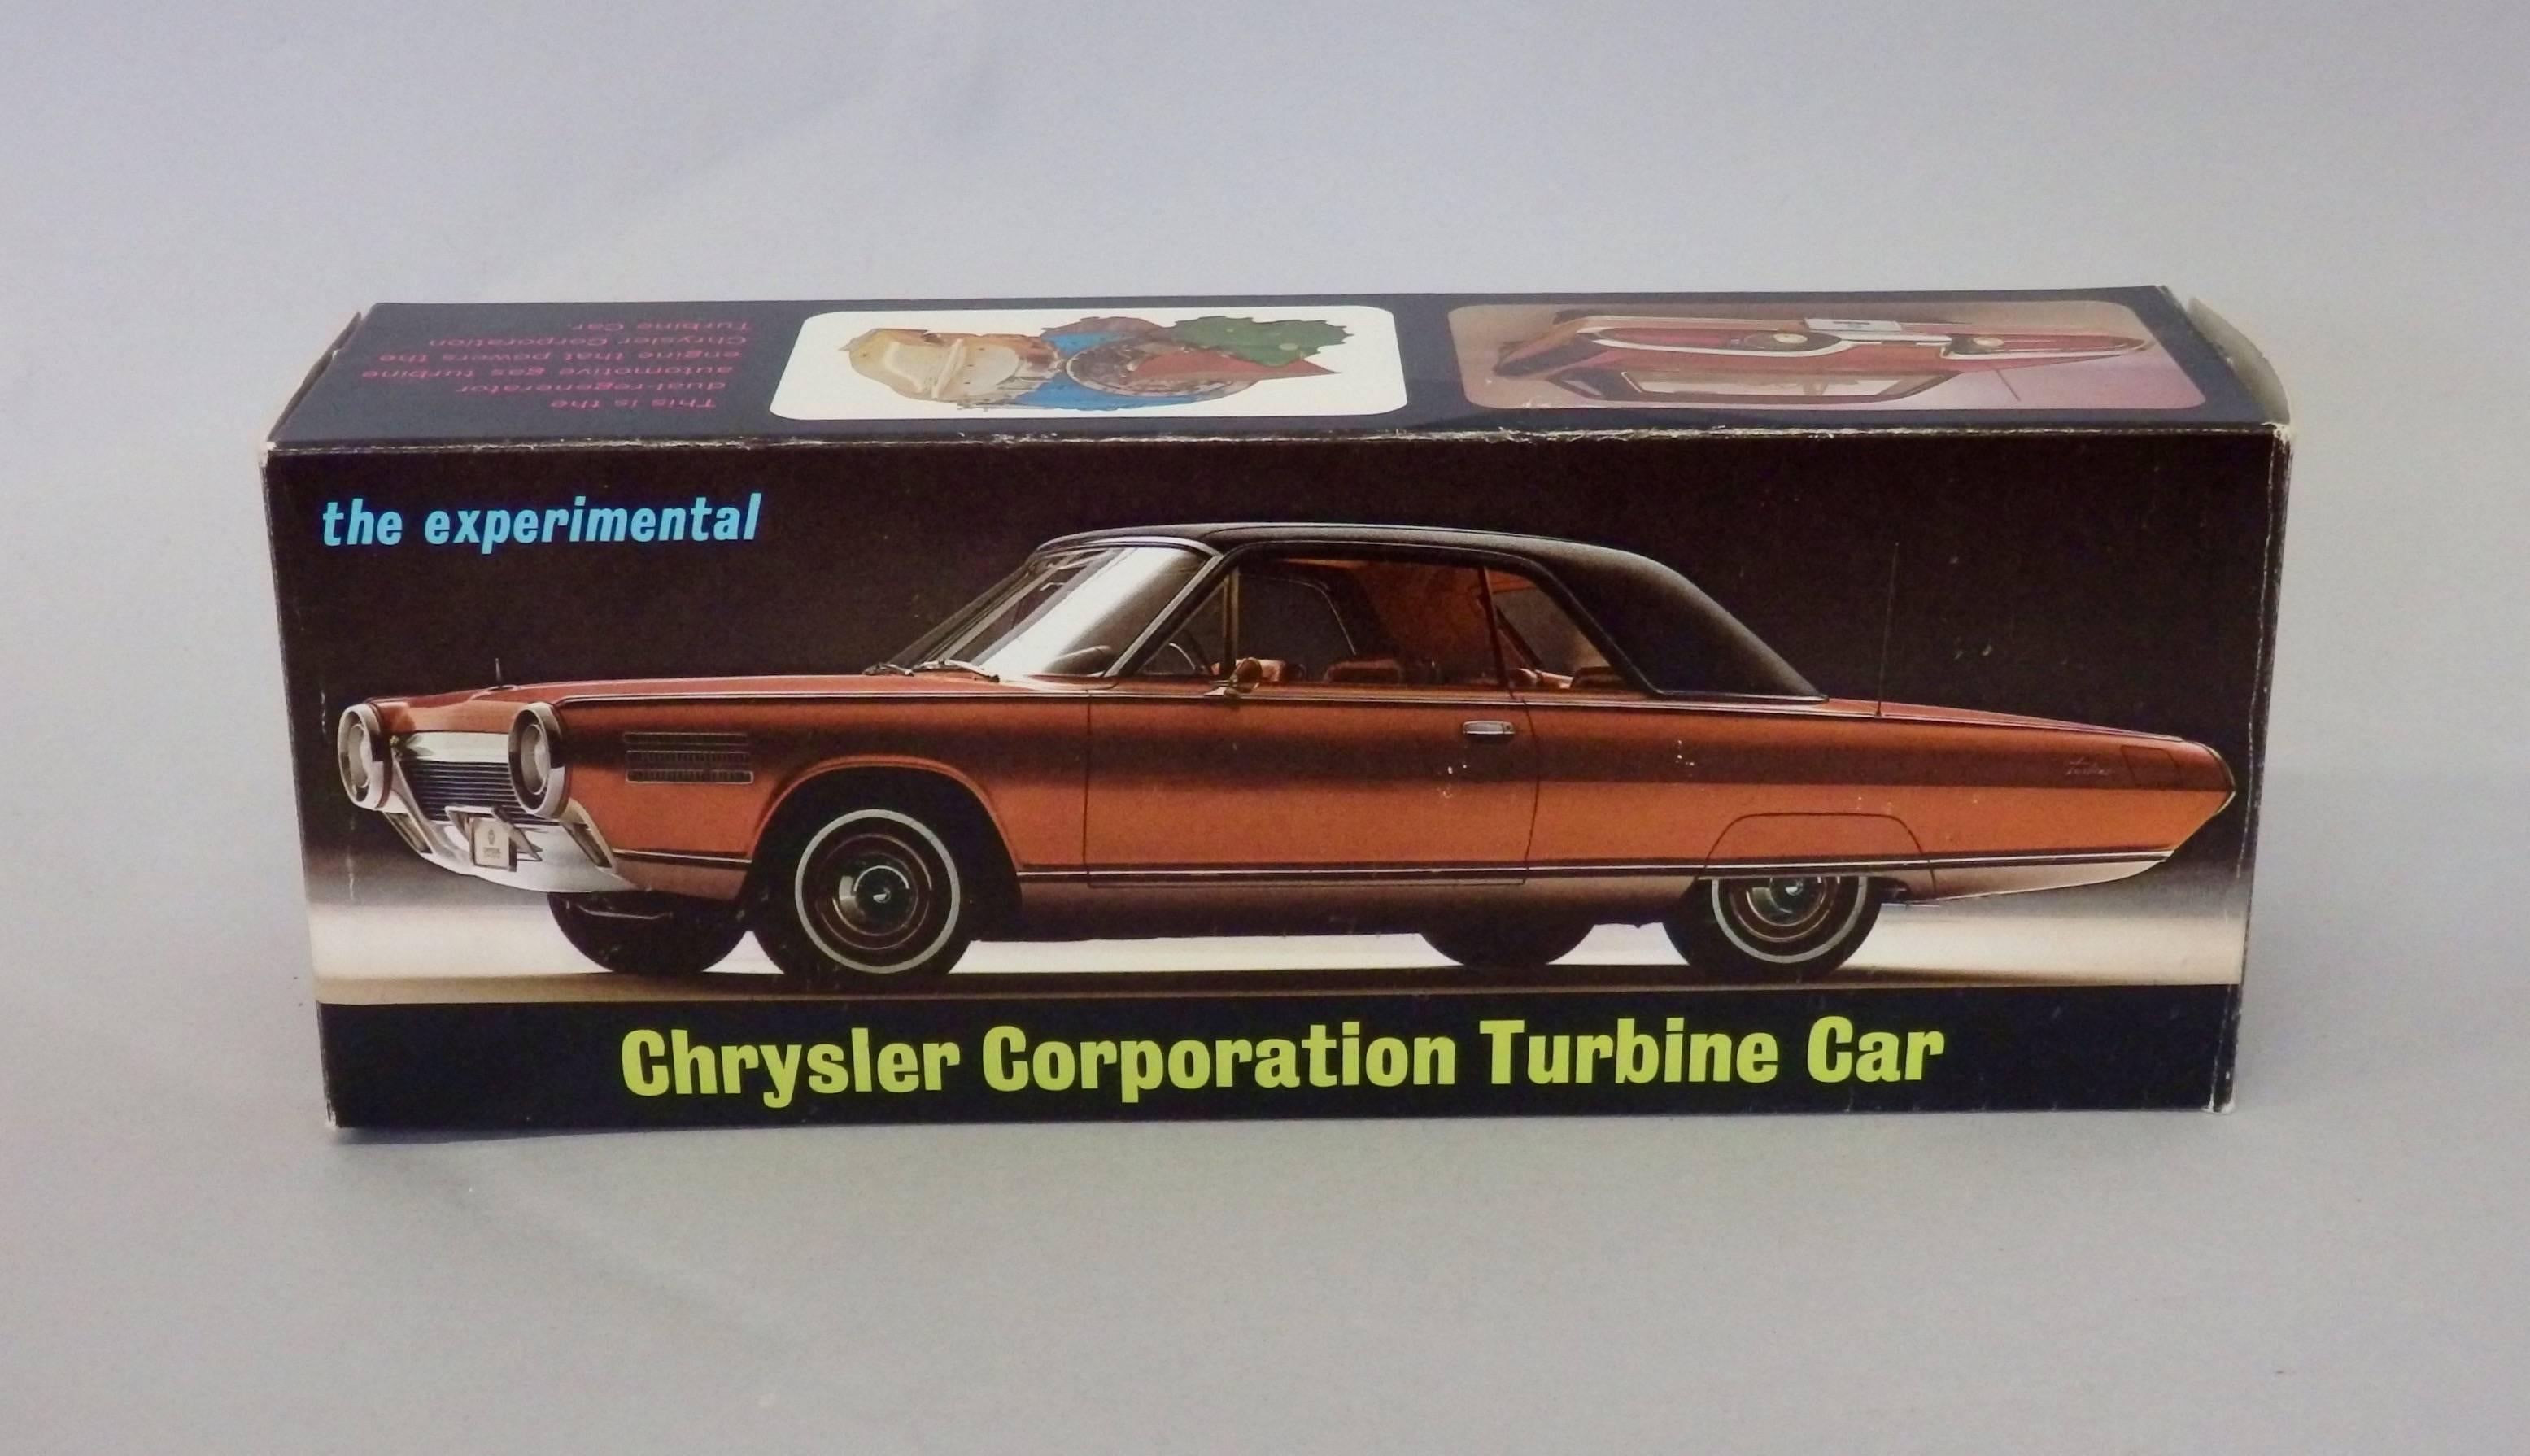 Chrysler promotional model of Elwood Engel designed turbine concept car. Vehicle did go to limited production of fifty five units. The bodies were built by Ghia in Turin Italy shipped to the U.S. for final assembly in Detroit. After brief testing